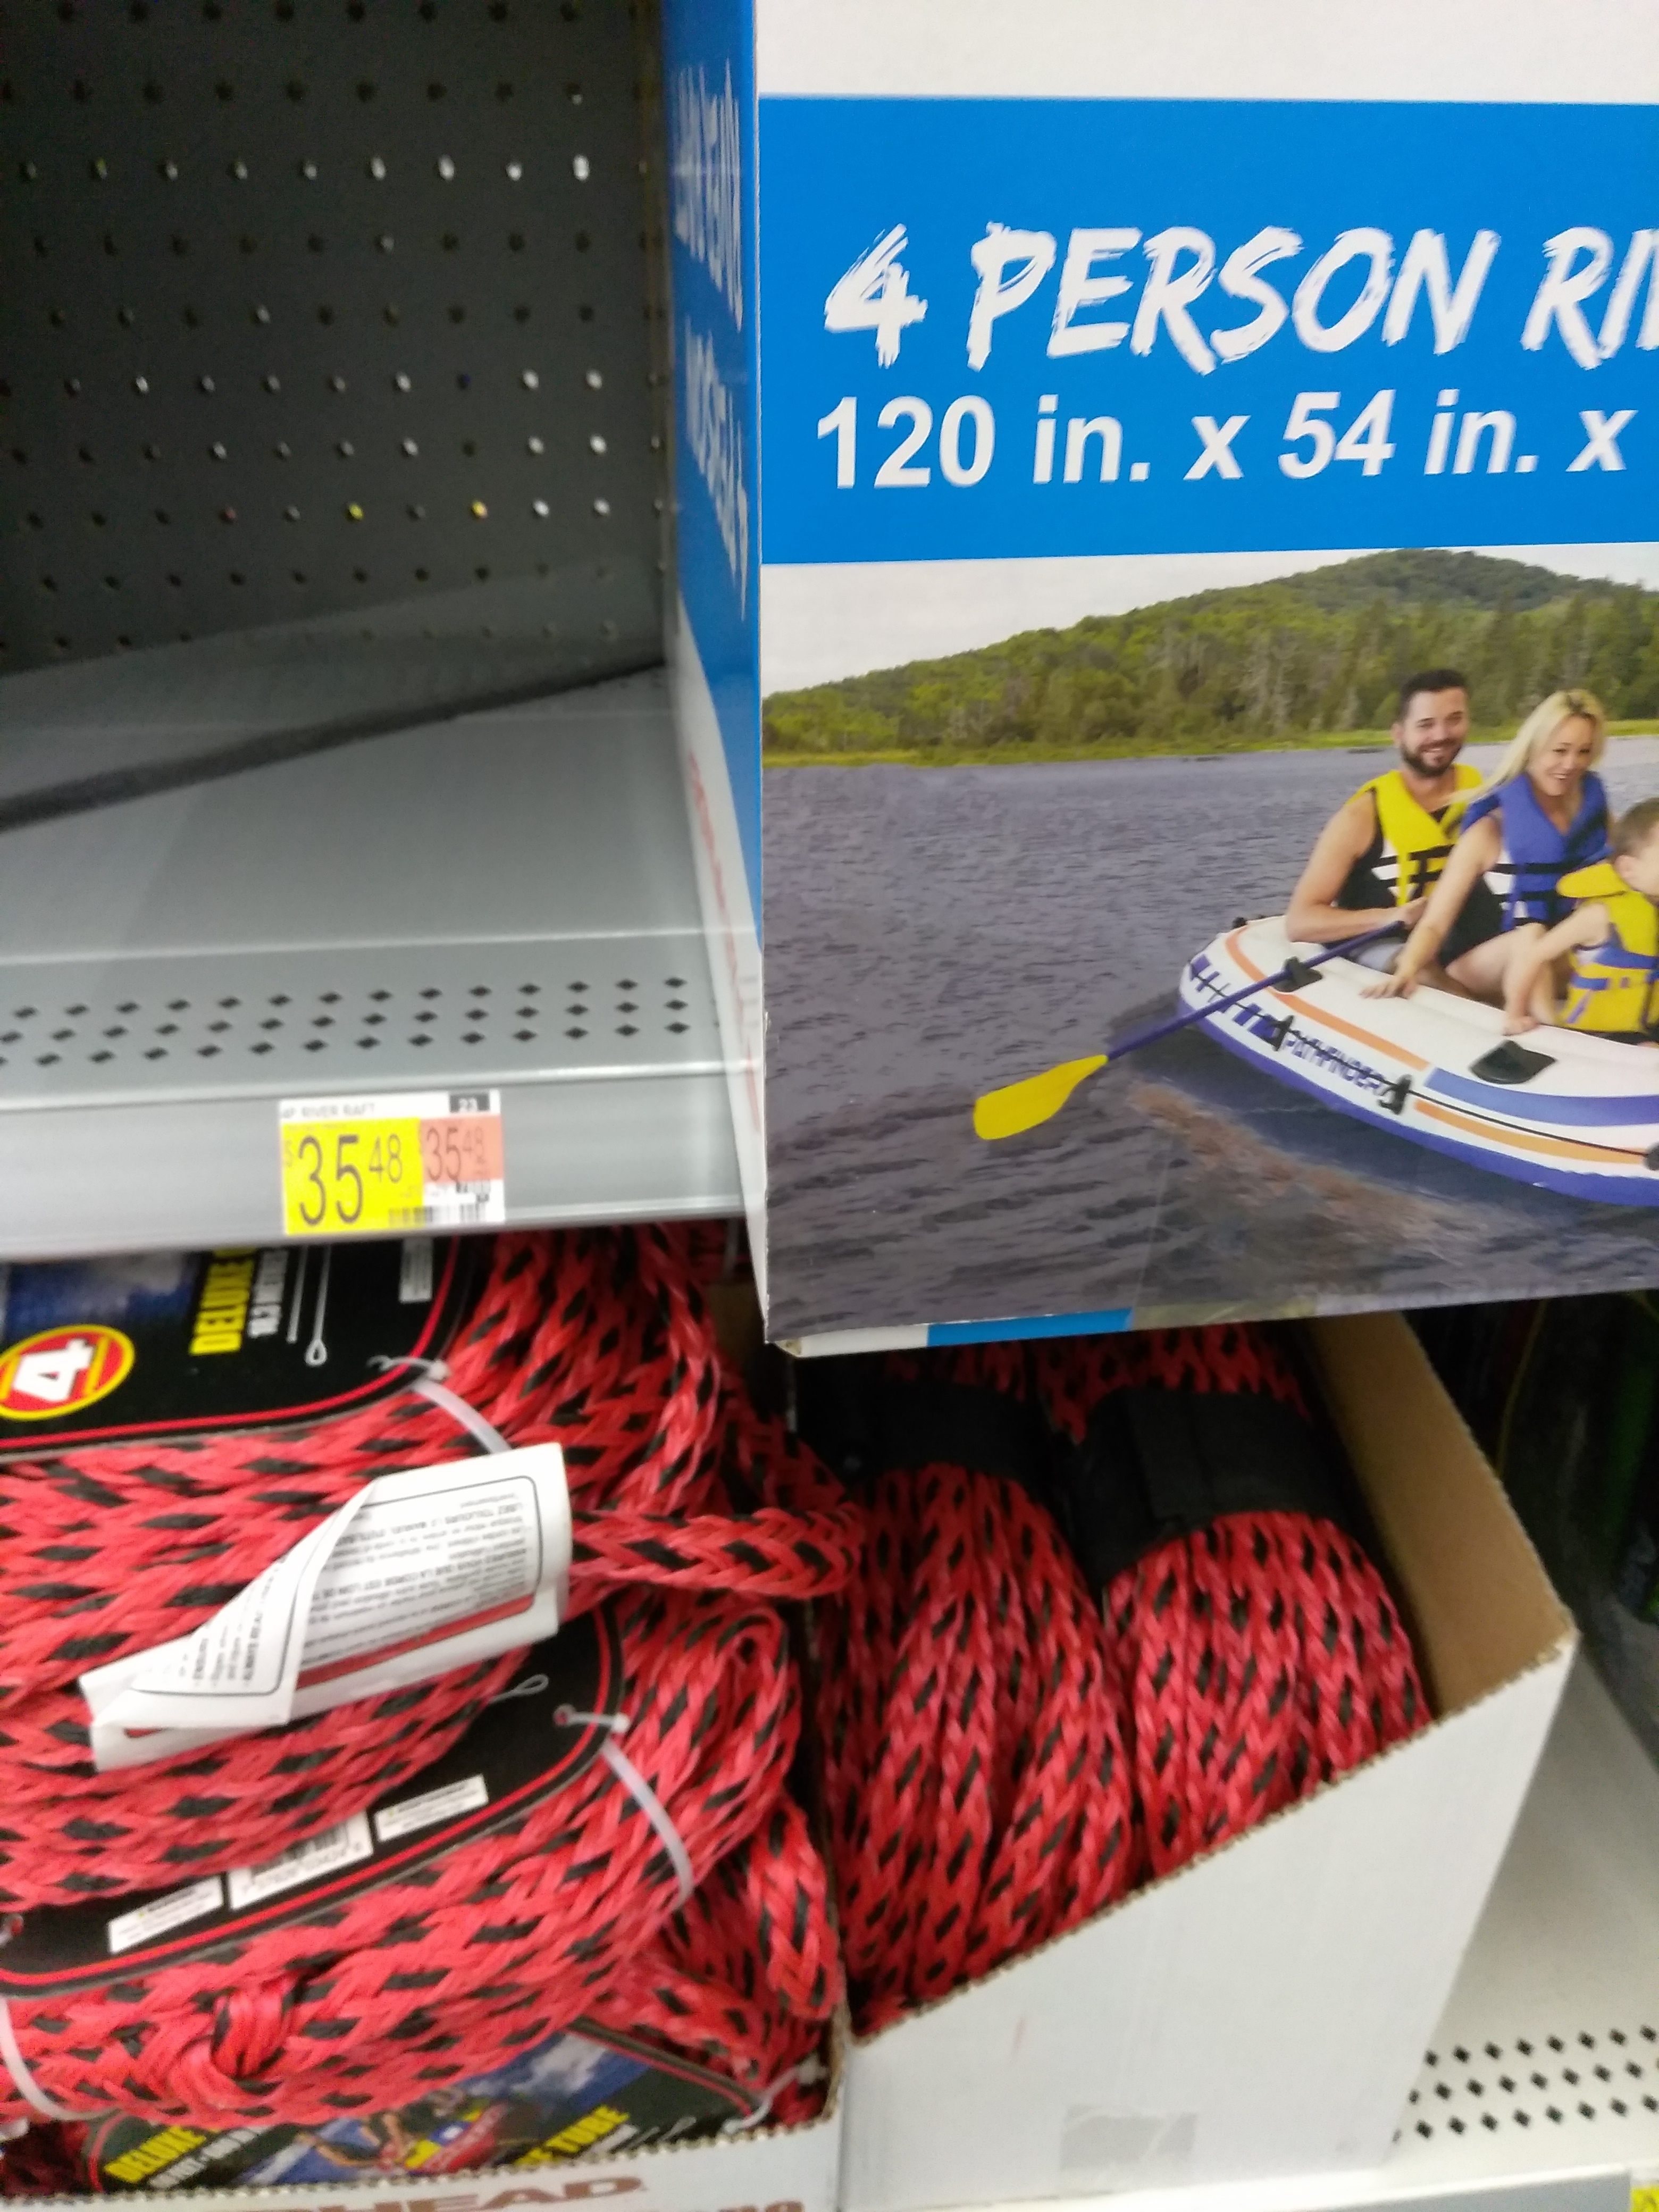 YMMV -- In-store only - Pathfinder 4 PERSON Inflatable Raft Boat With Pump & Oars Sports River Canoe Rafting Outdoor Beach Lake WLM8 (67889) - $108.99 on Walmart.com, $35.48YMMV